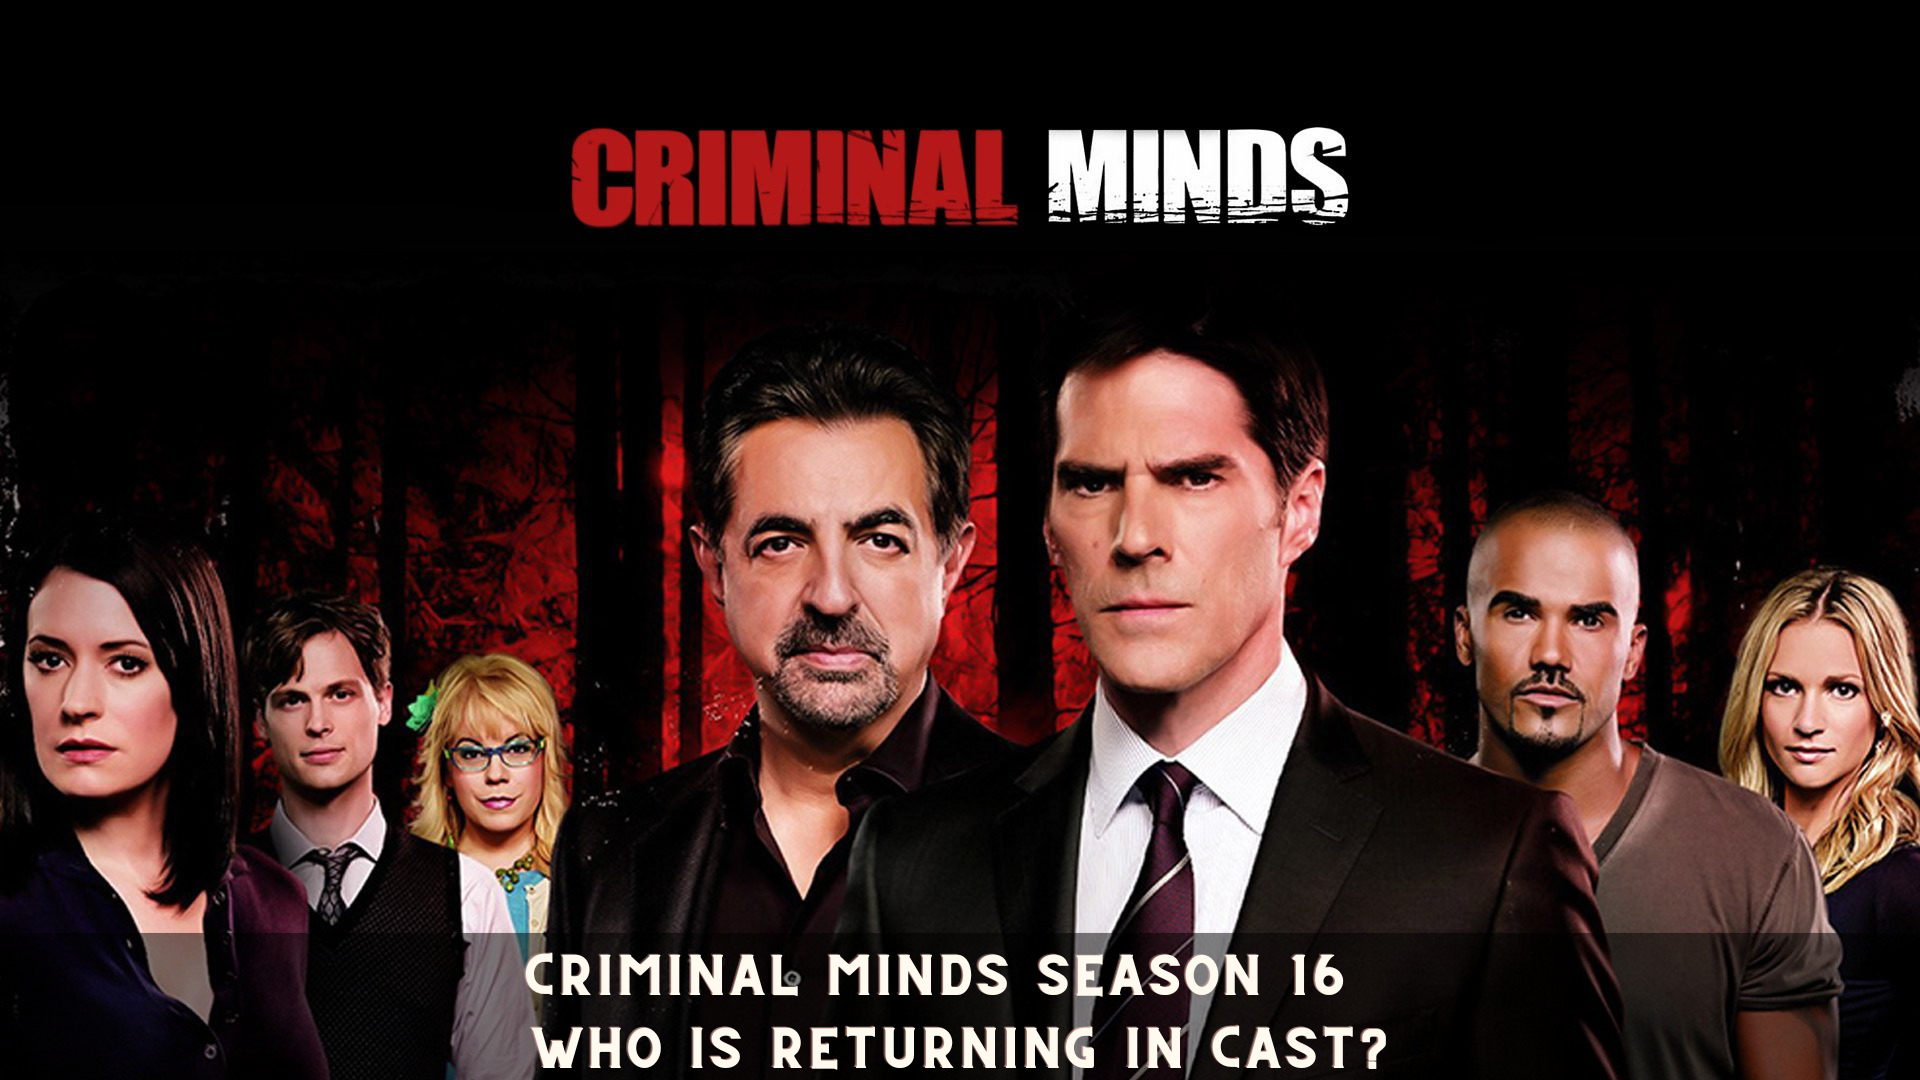 Criminal Minds Season 16 - Who is Returning in Cast?